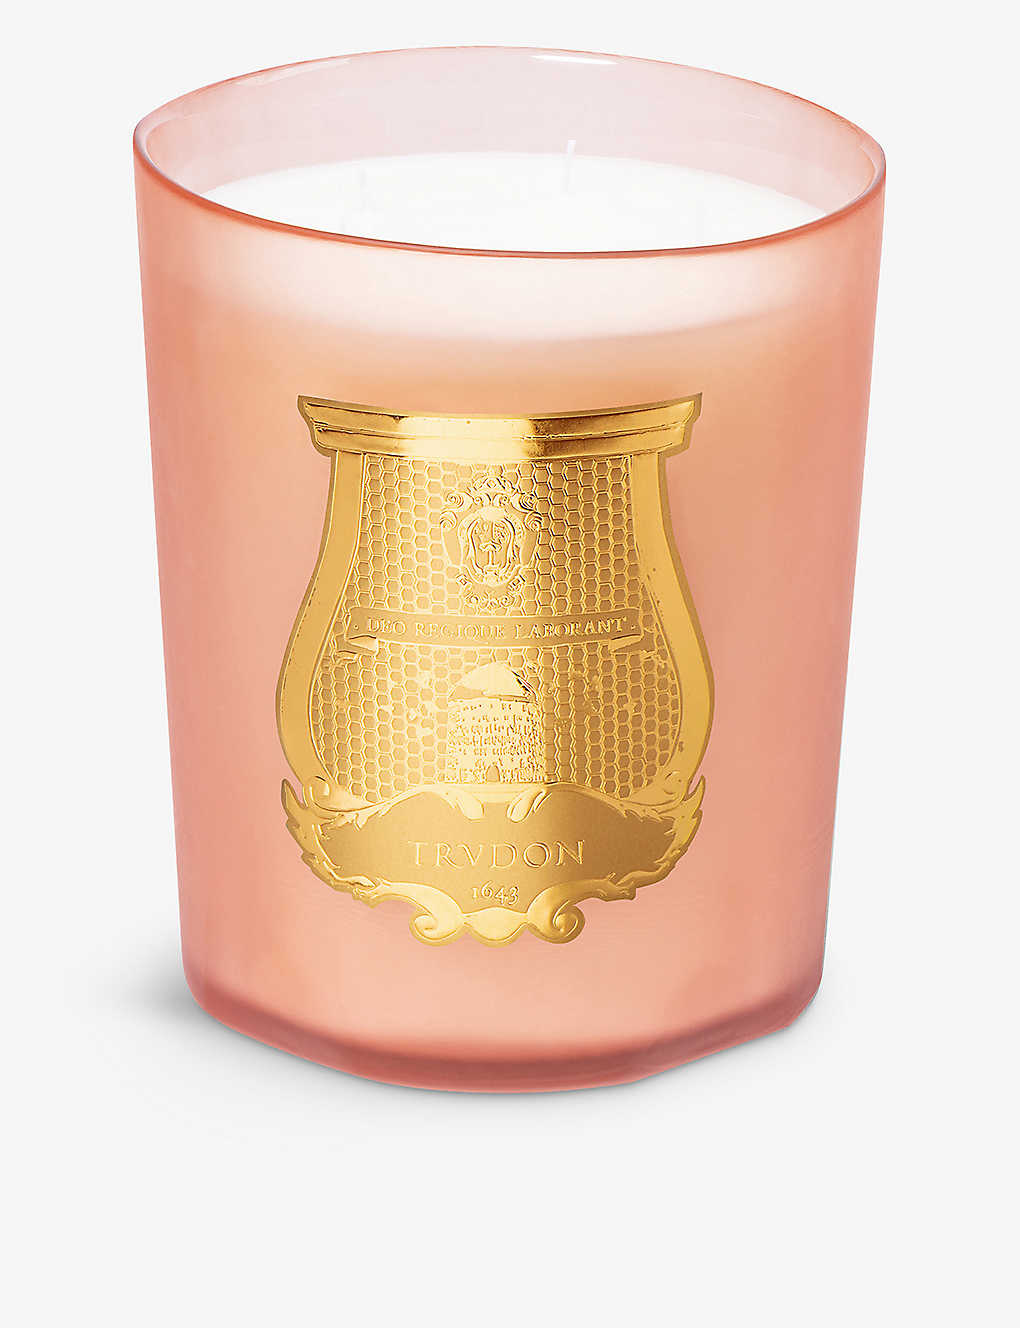 Trudon The Great Candle Tuileries Scented Candle 6400g